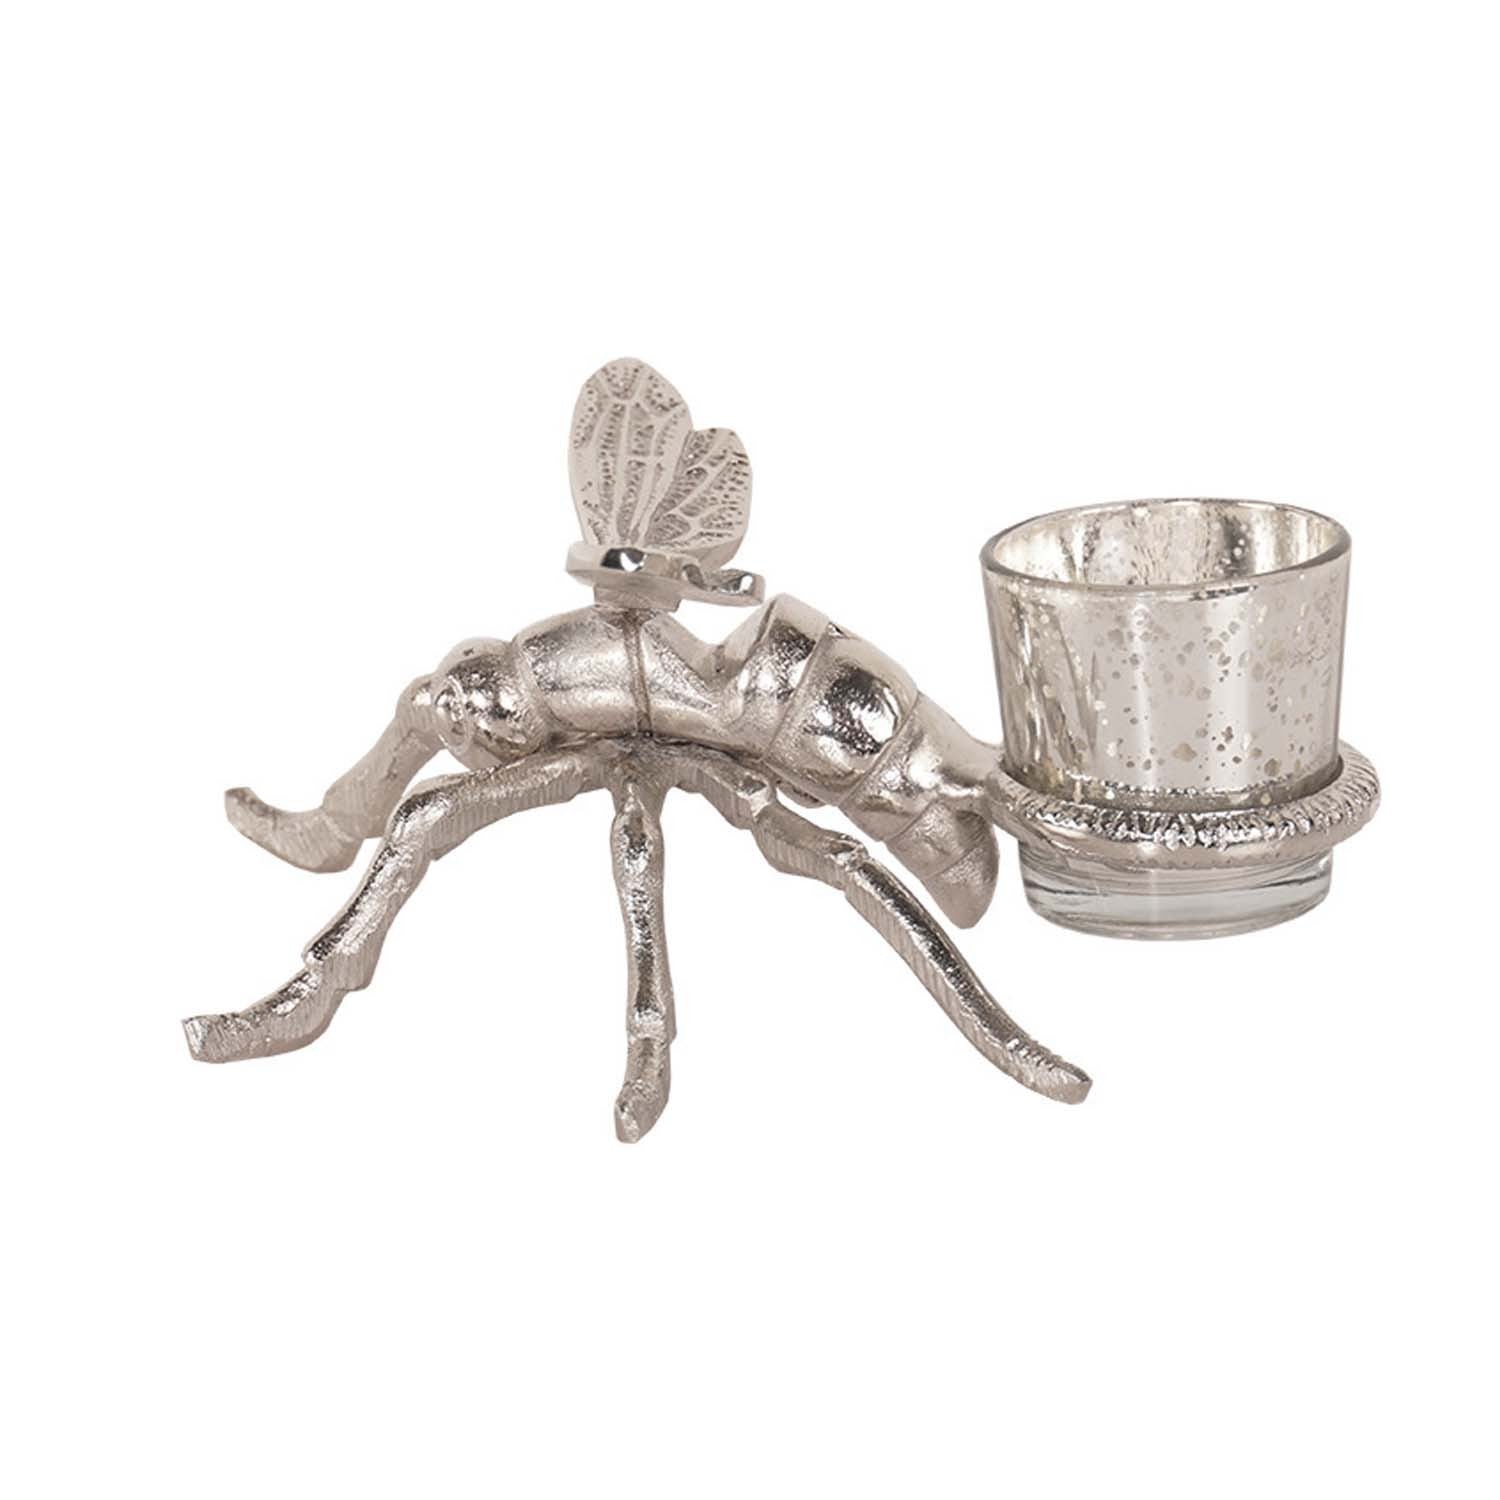 View Silver Dragonfly Tealight Holder information